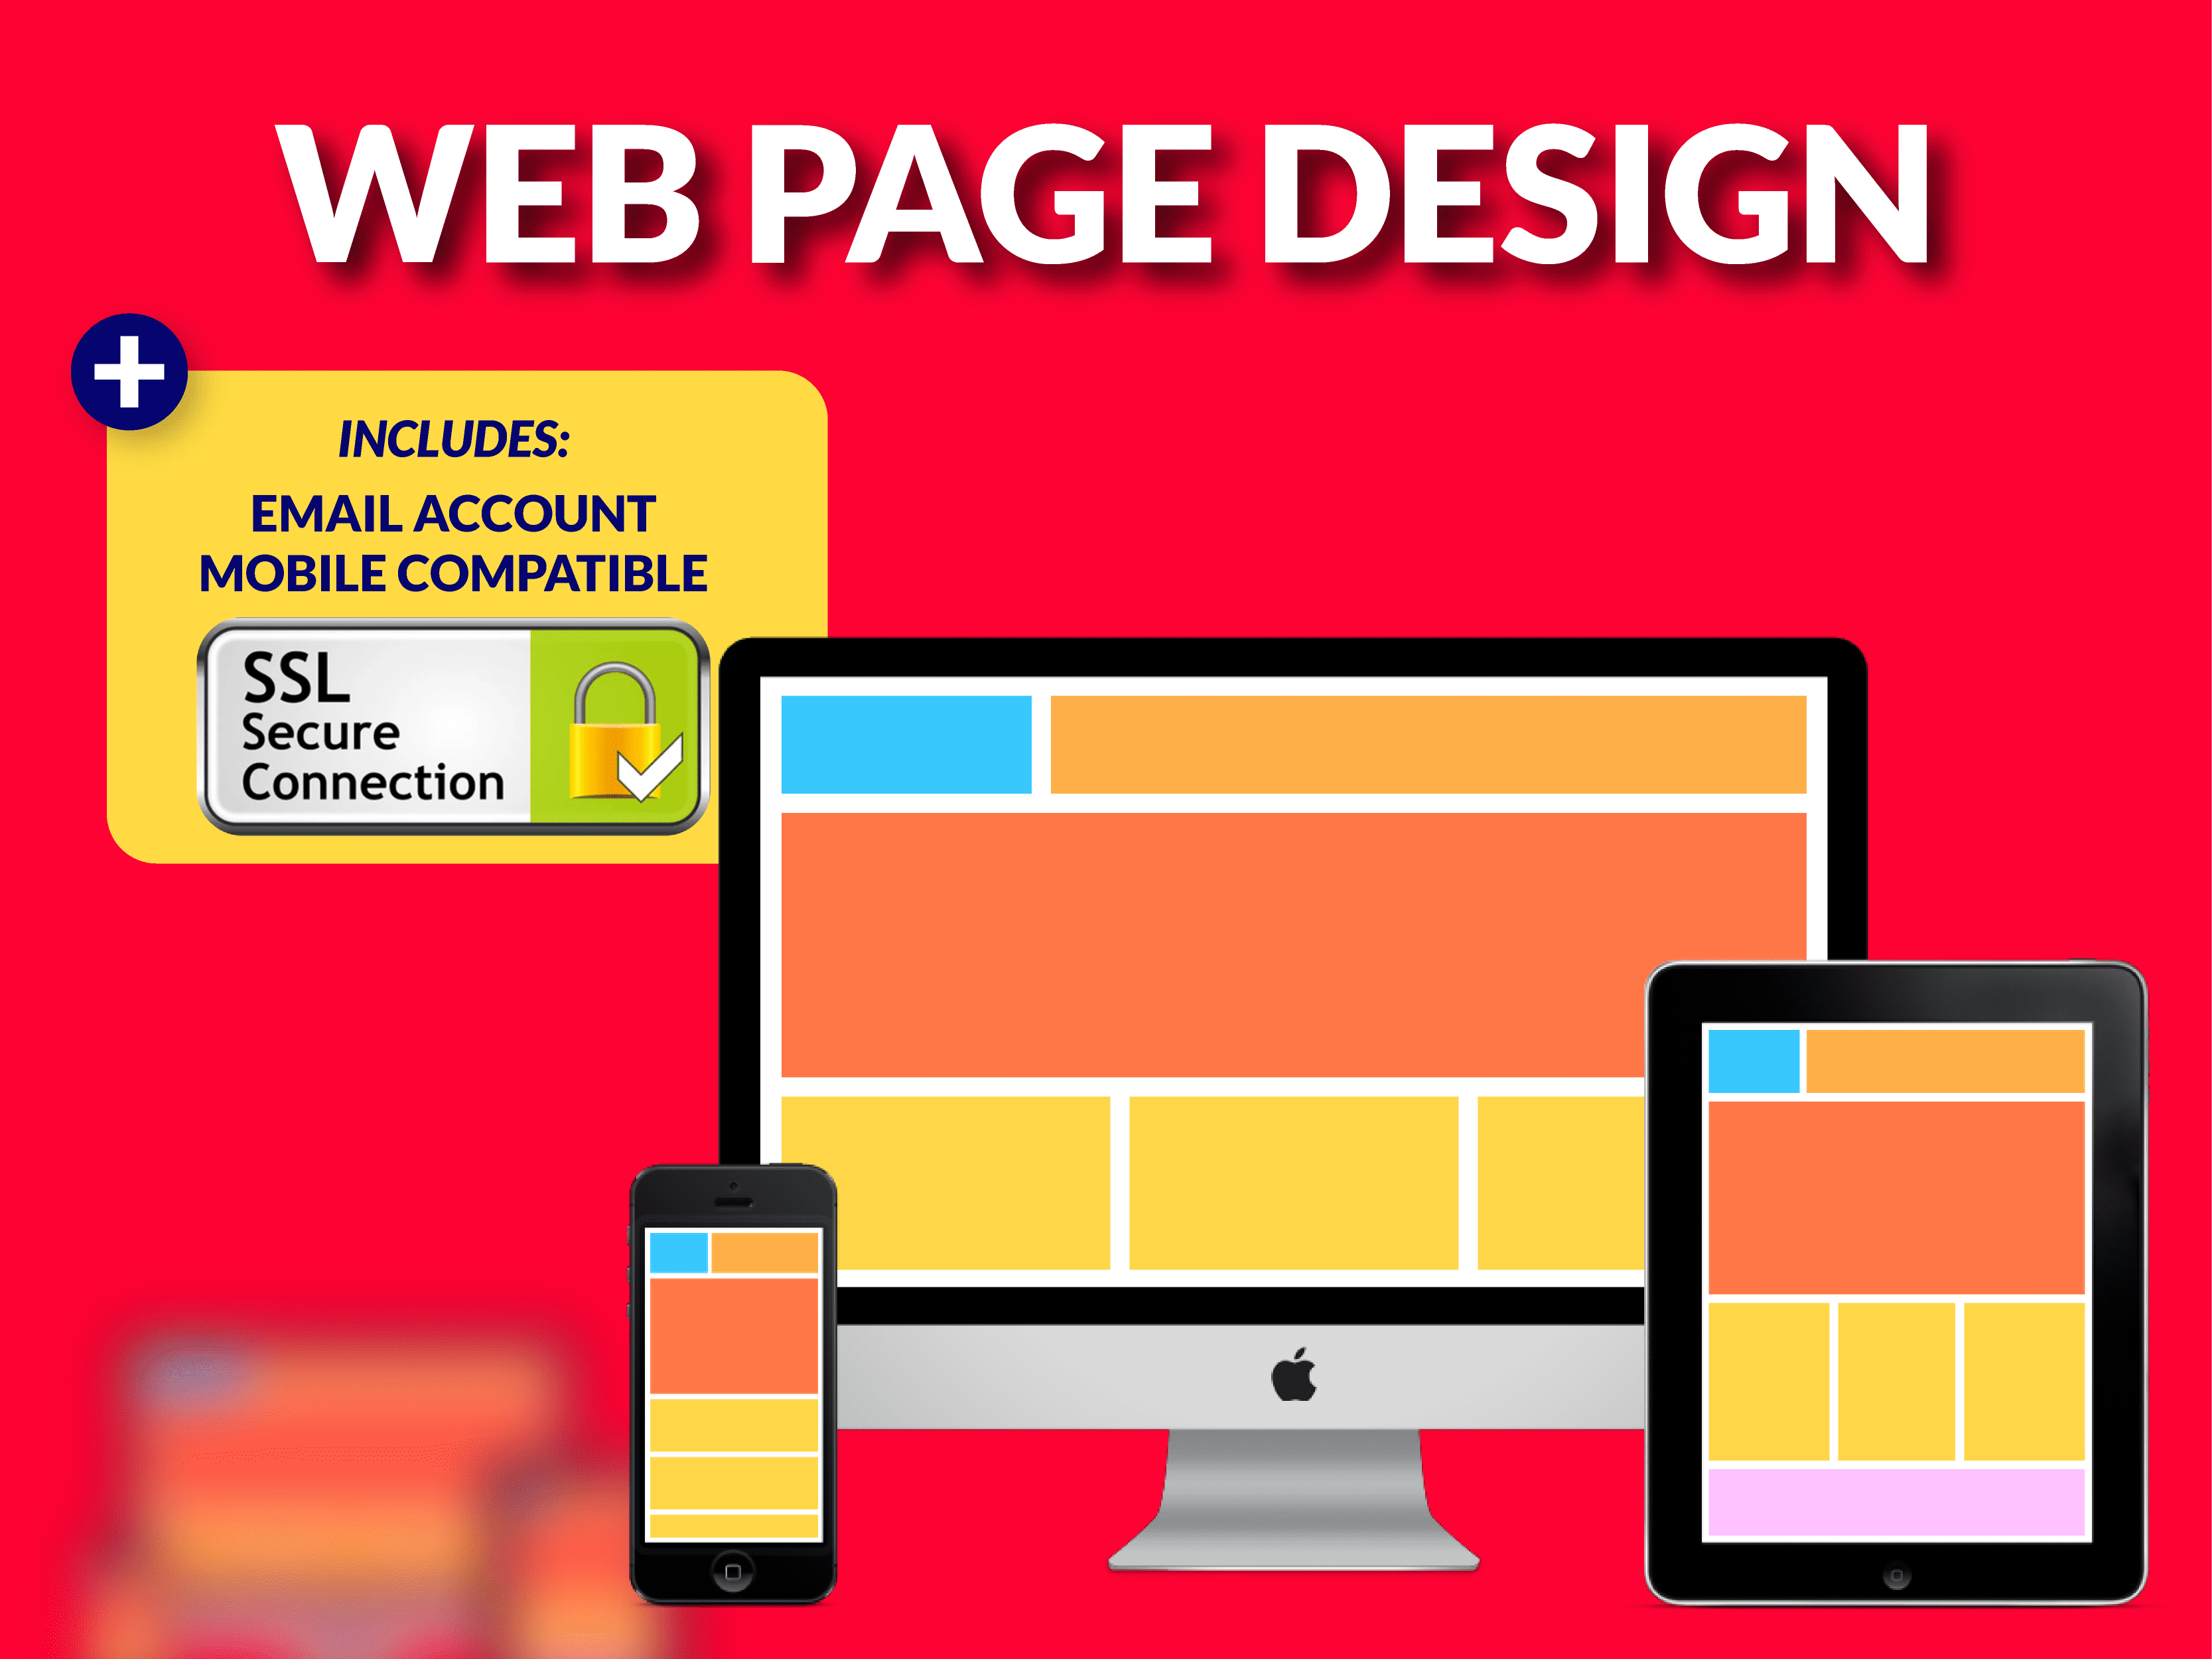 This image refers to our Web Page Design promotion. To learn more about Web Page Design, feel free to check out the 'Services' section in the menu. Happy exploring!